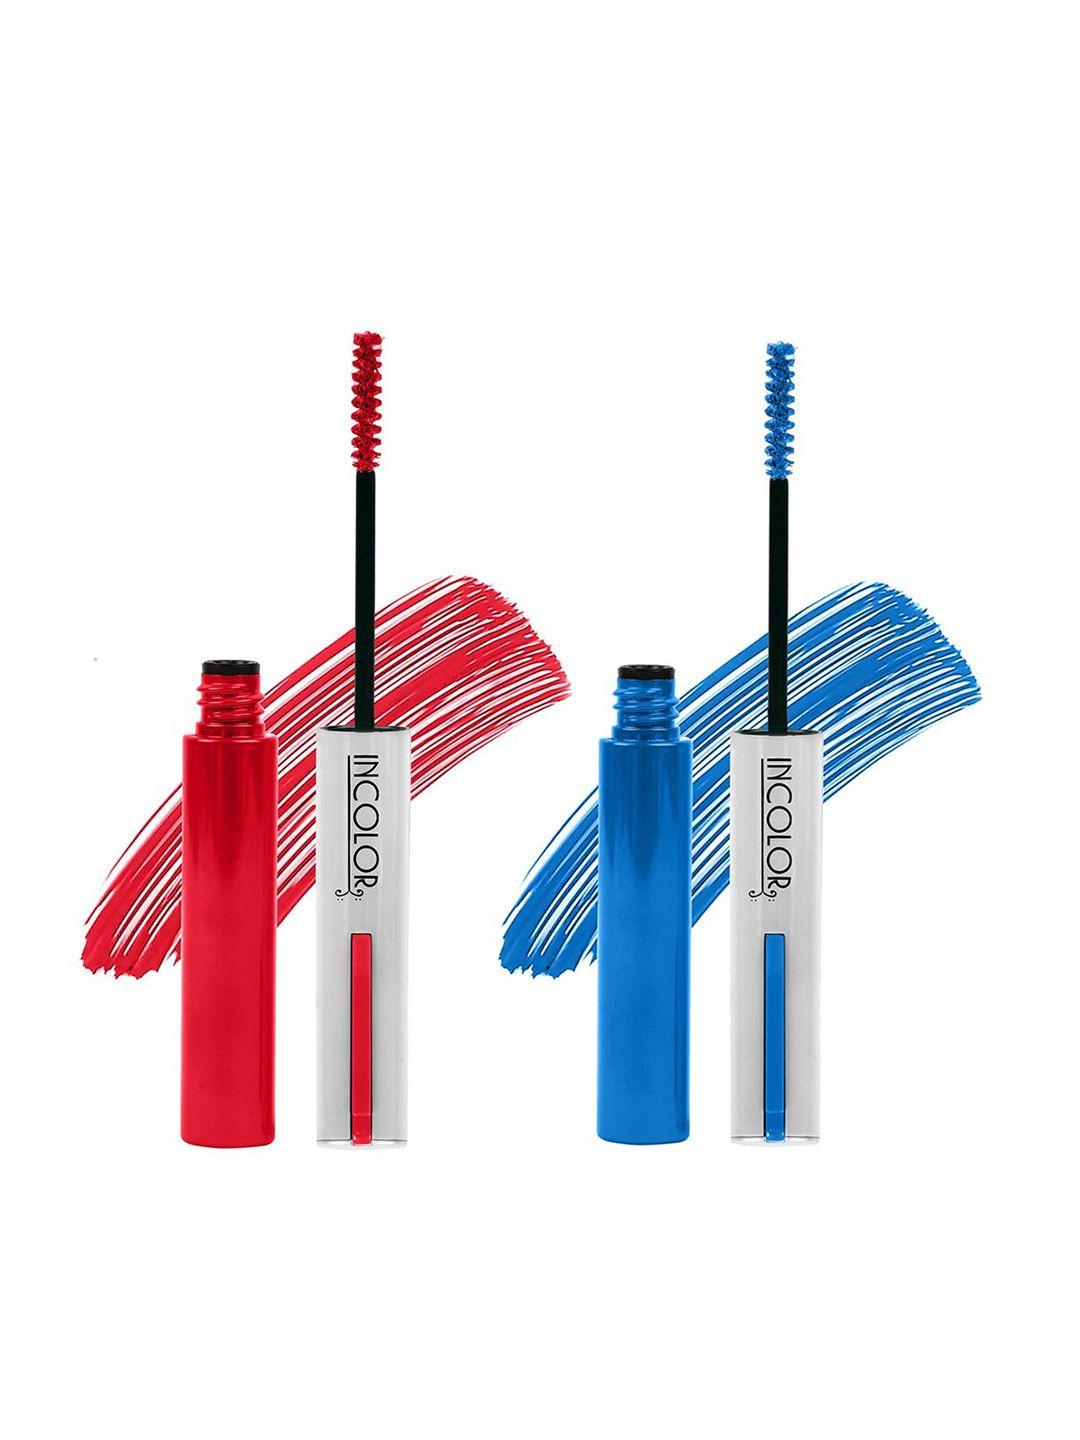 incolor set of 2 light weight color mascara 6ml each - imperial red 05 & blueberry pop 03